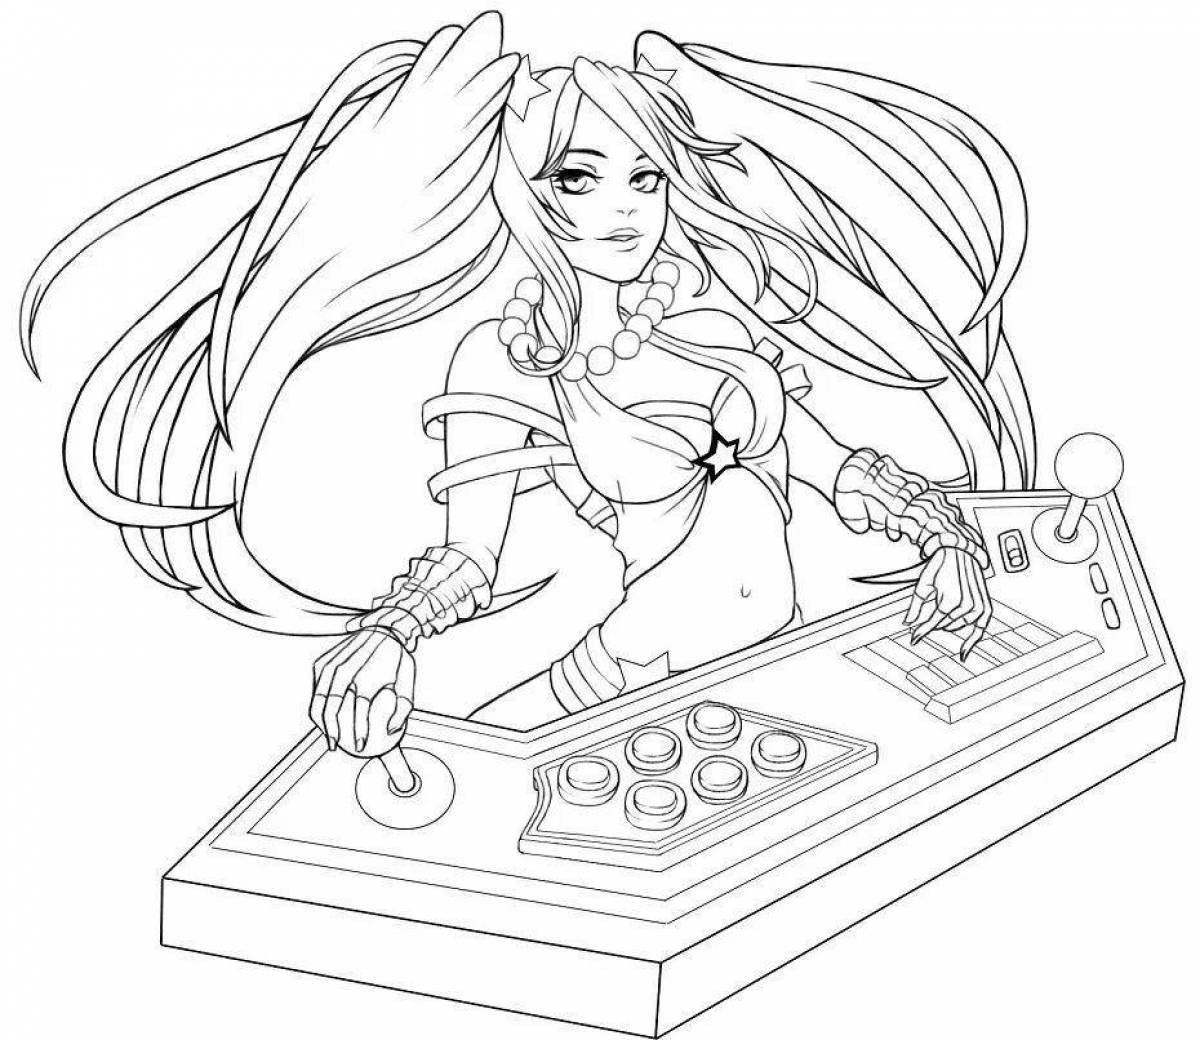 Brilliantly colored league of legends coloring page